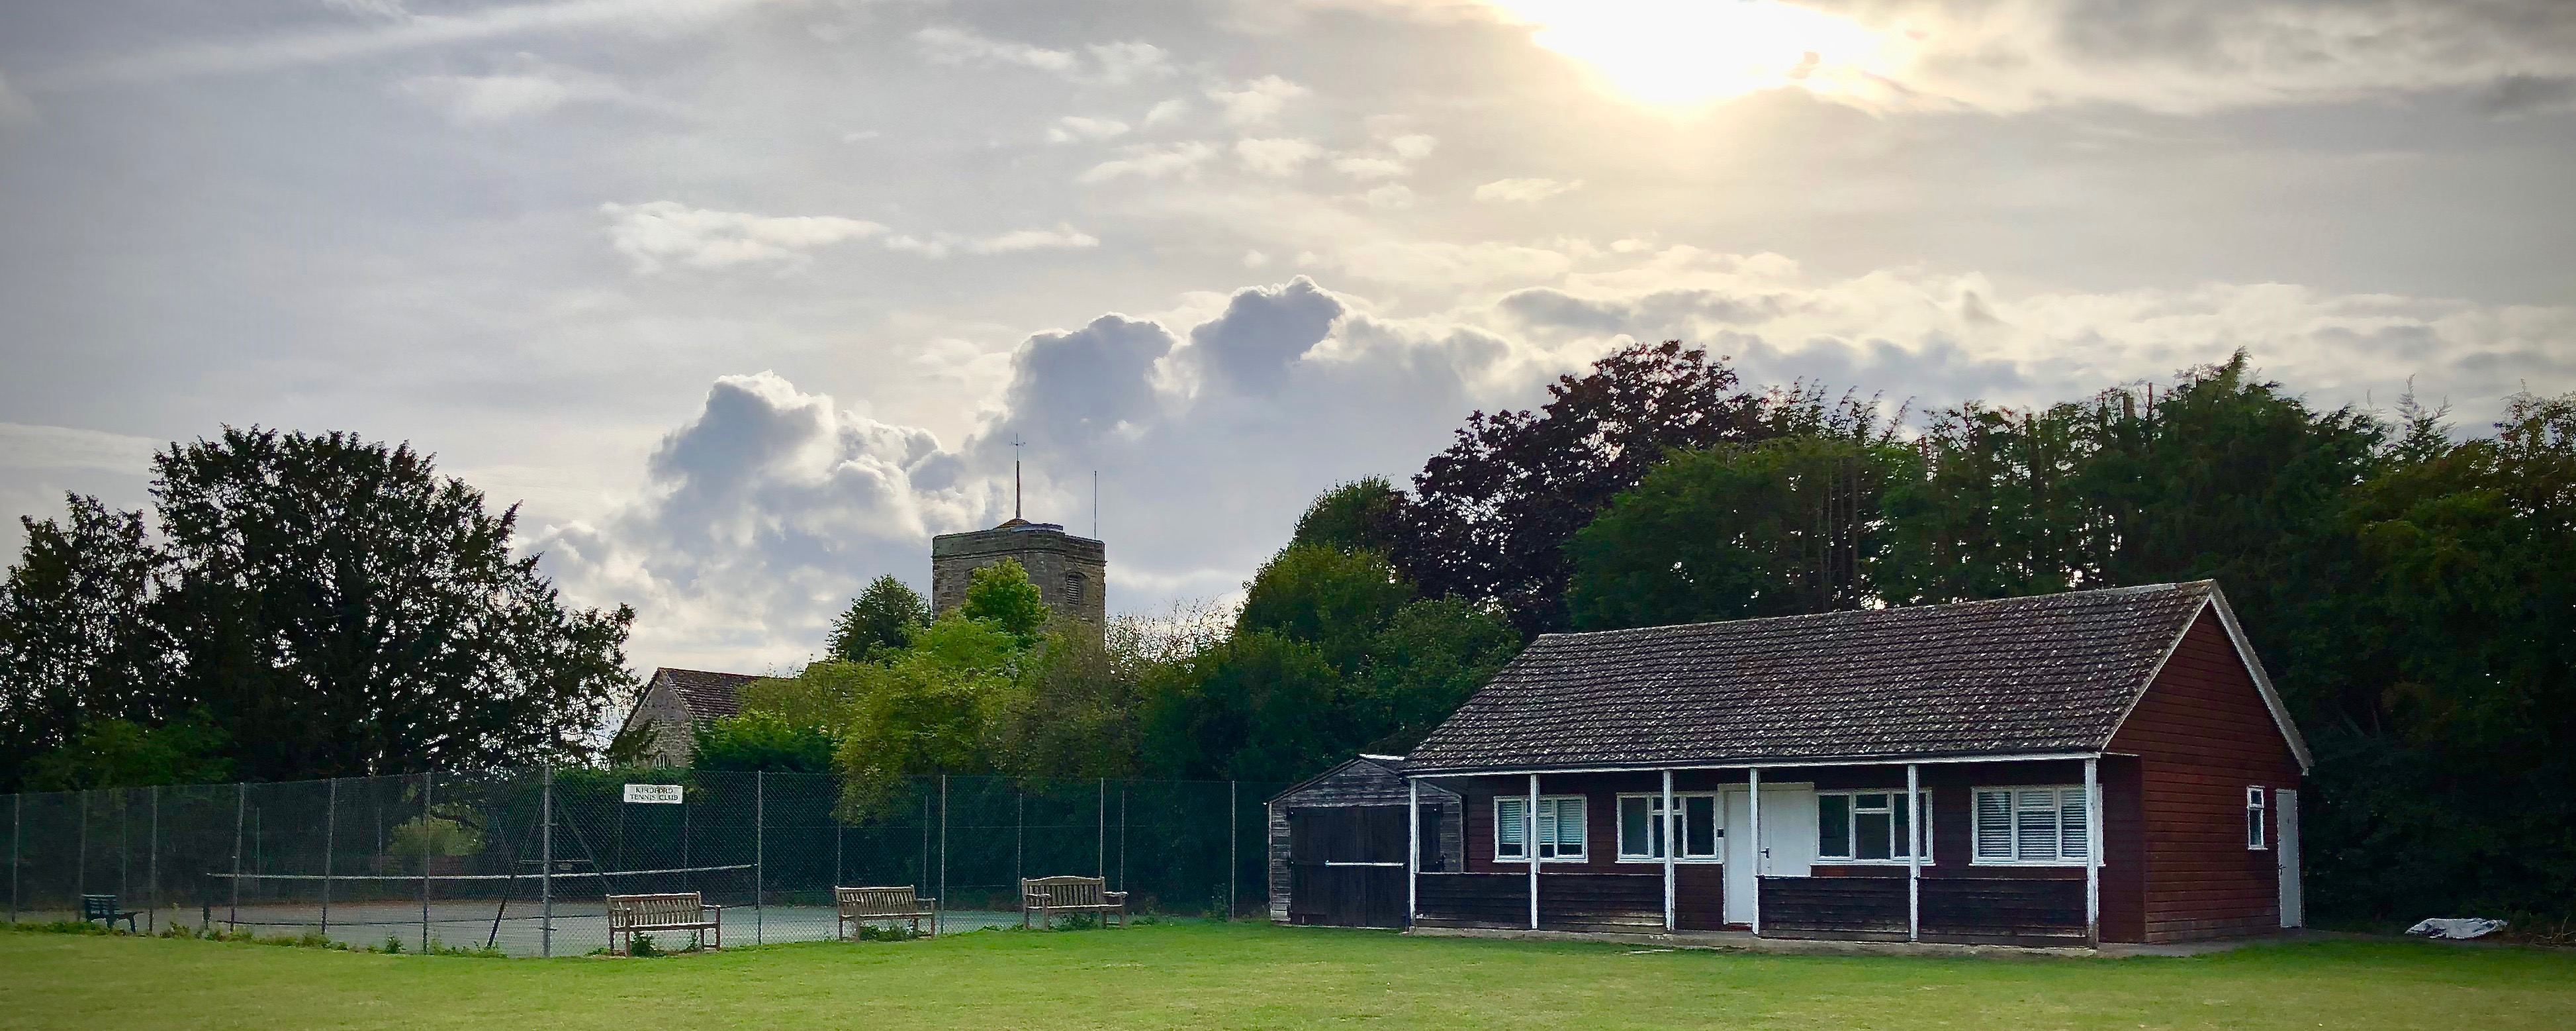 Kirdford Pavilion and tennis court, with church in the background